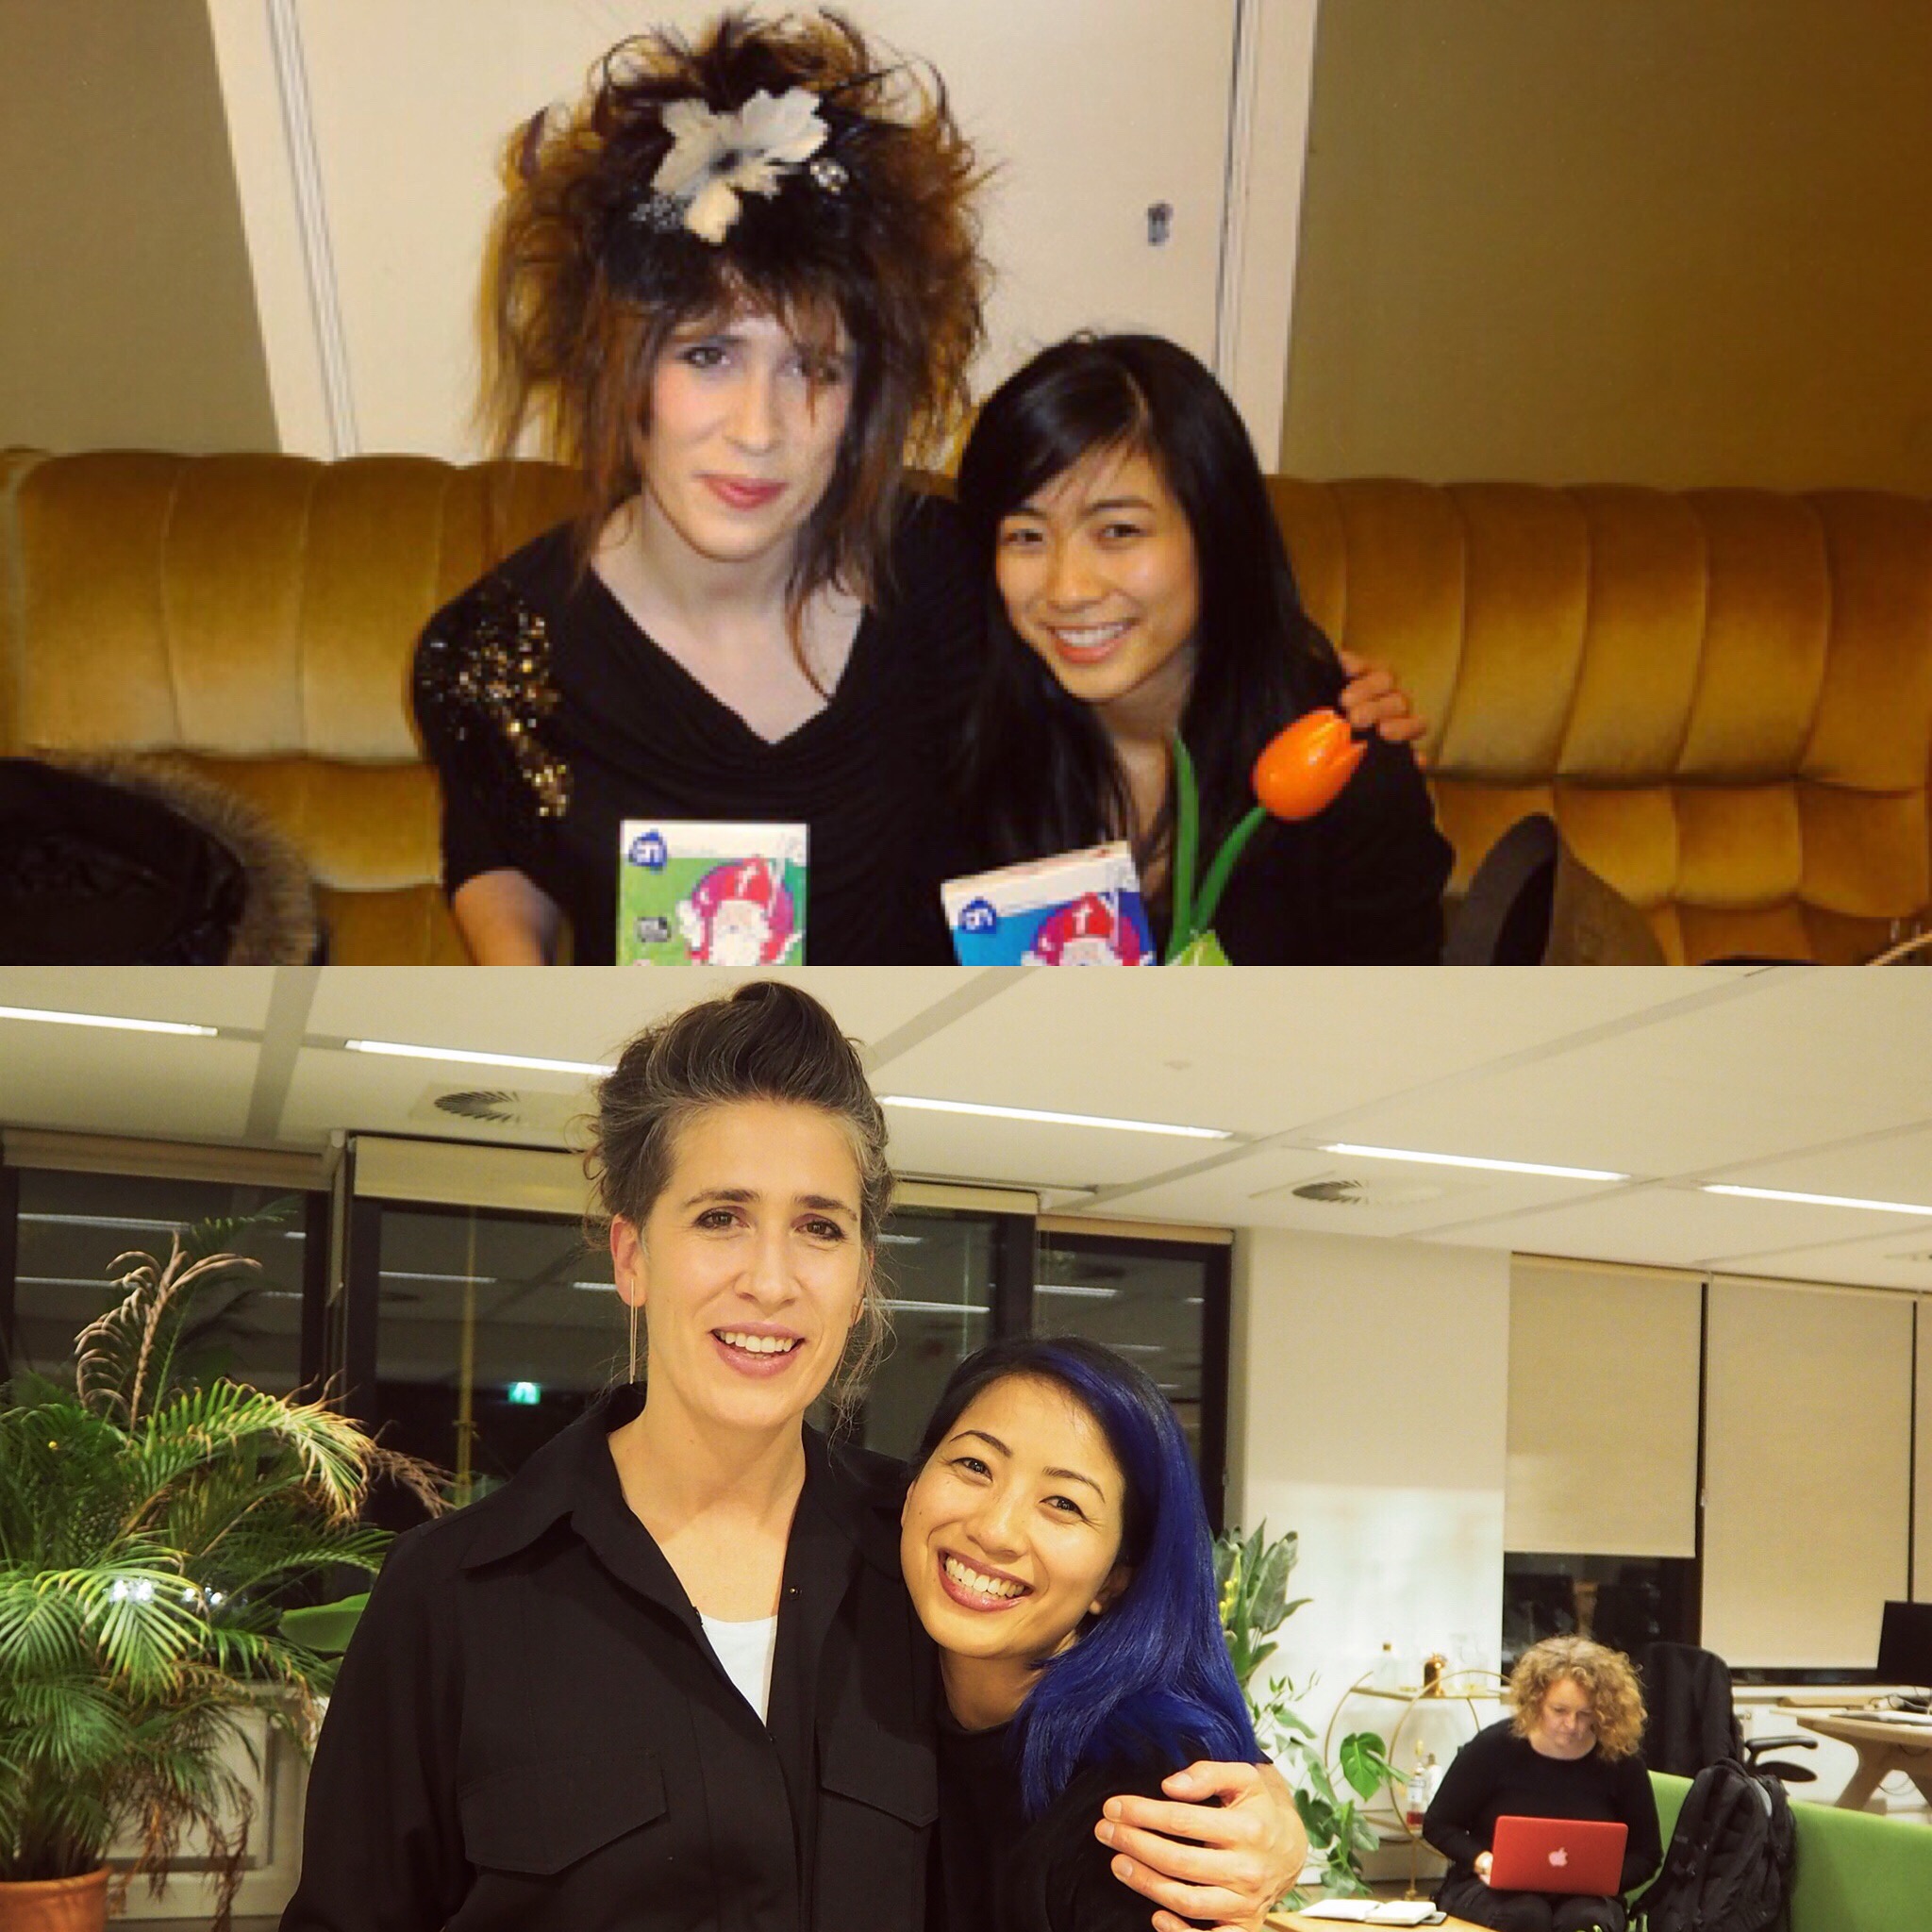 Meeting Imogen Heap Again 8 Years Since Our Performance The Wong Janice Music Producer Cellist